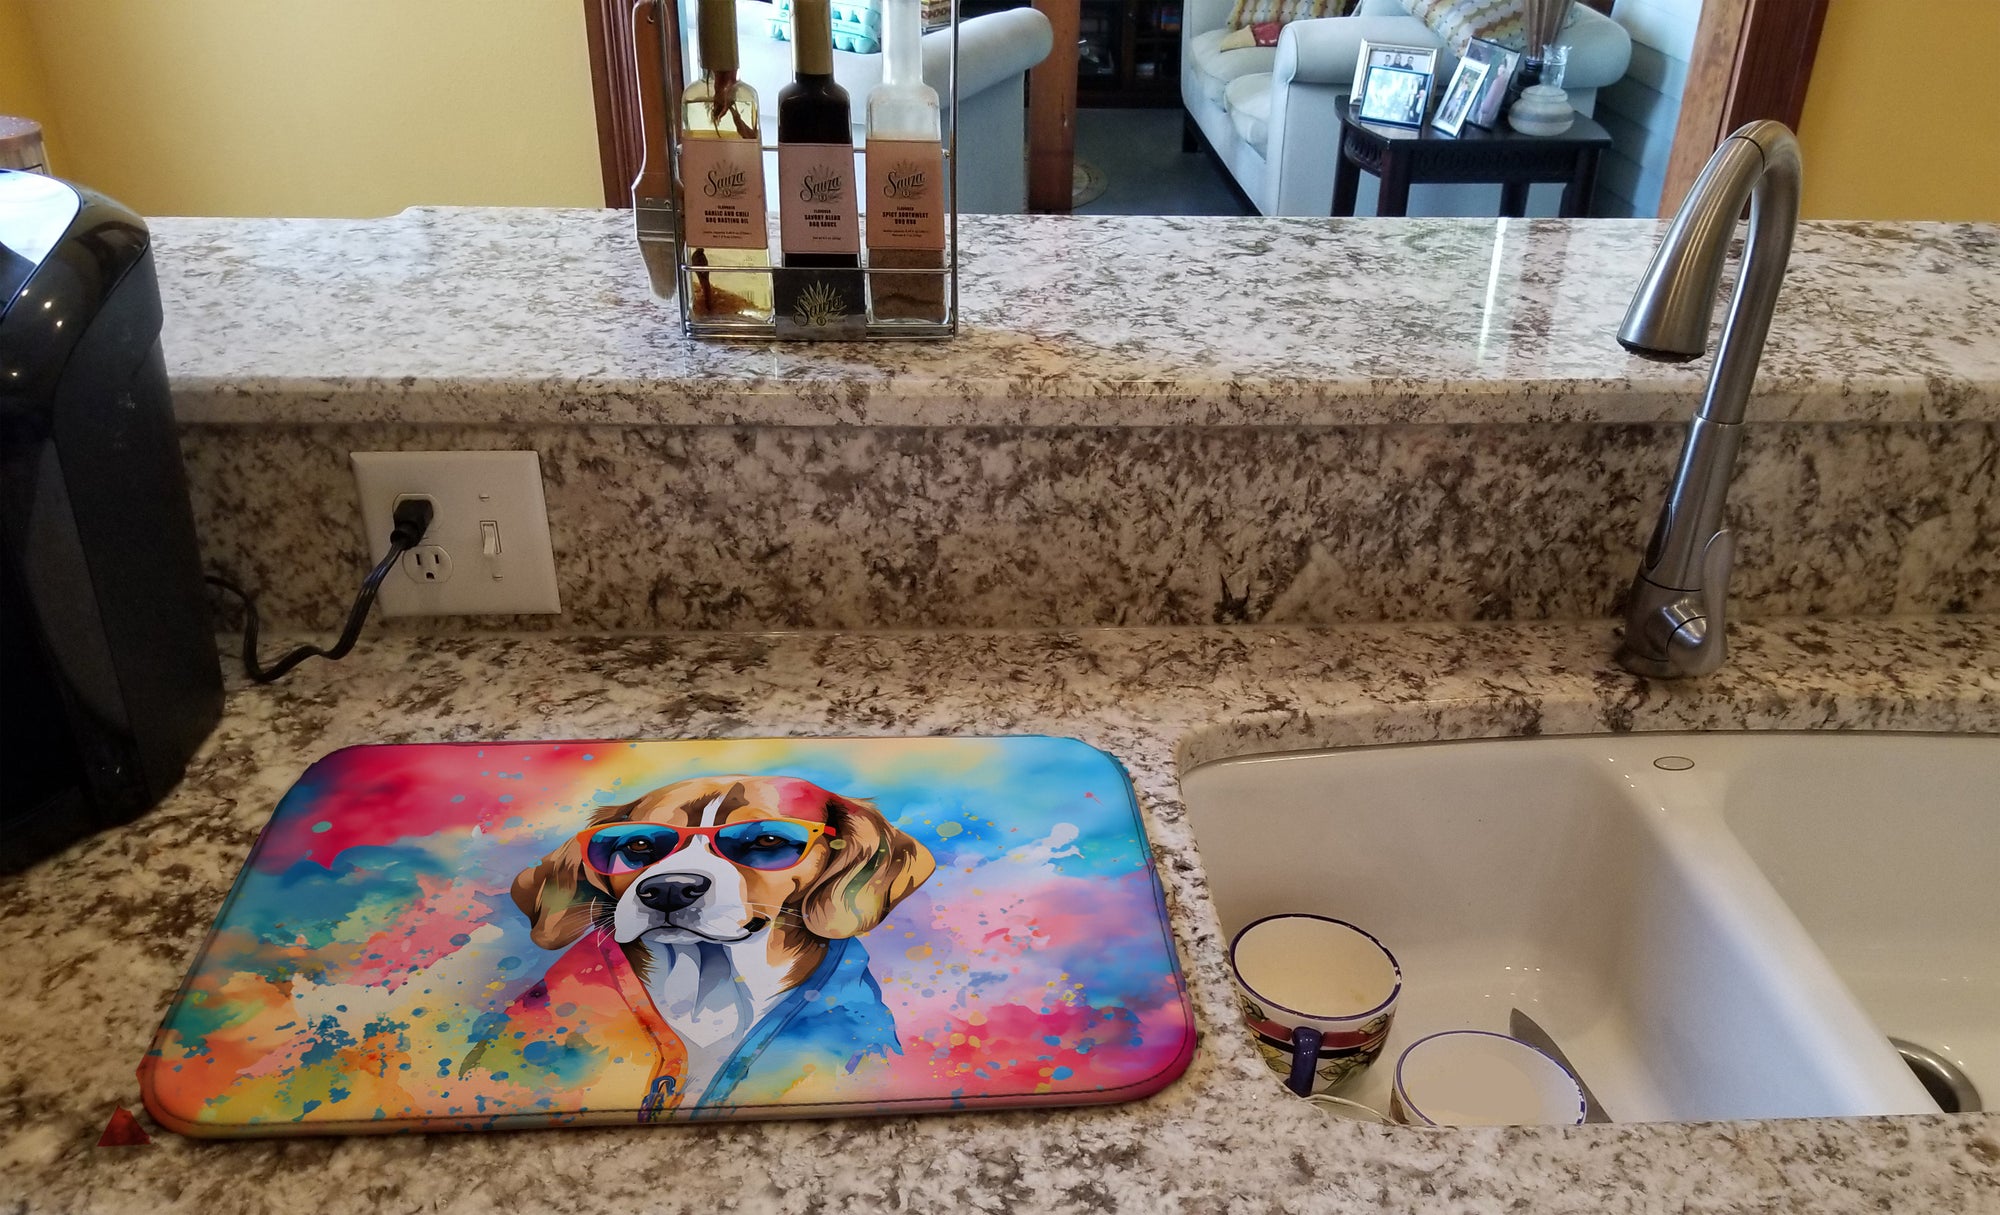 Buy this Beagle Hippie Dawg Dish Drying Mat